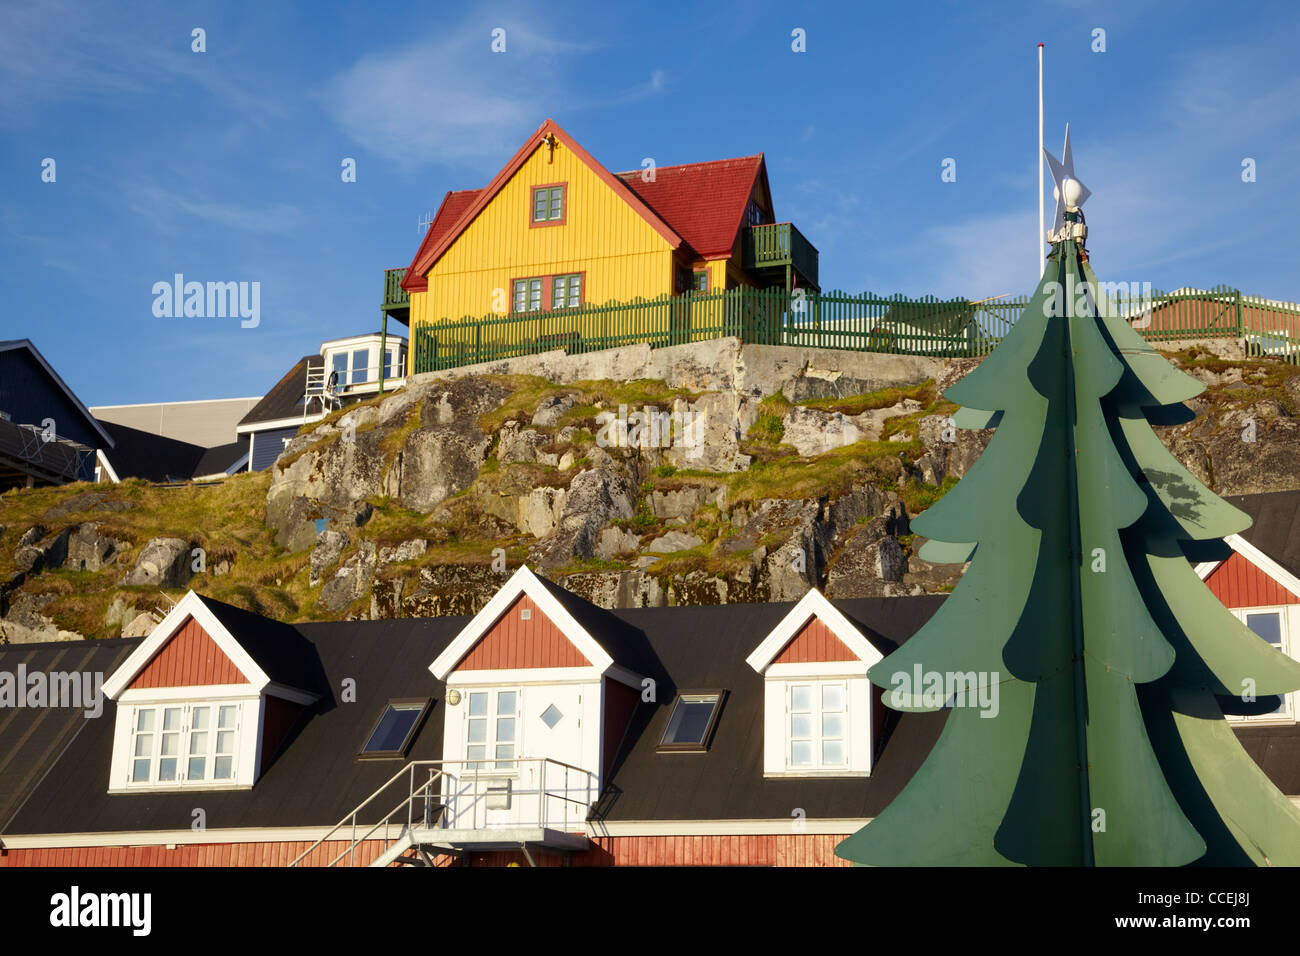 House on a hill, Nuuk, Greenland Stock Photo